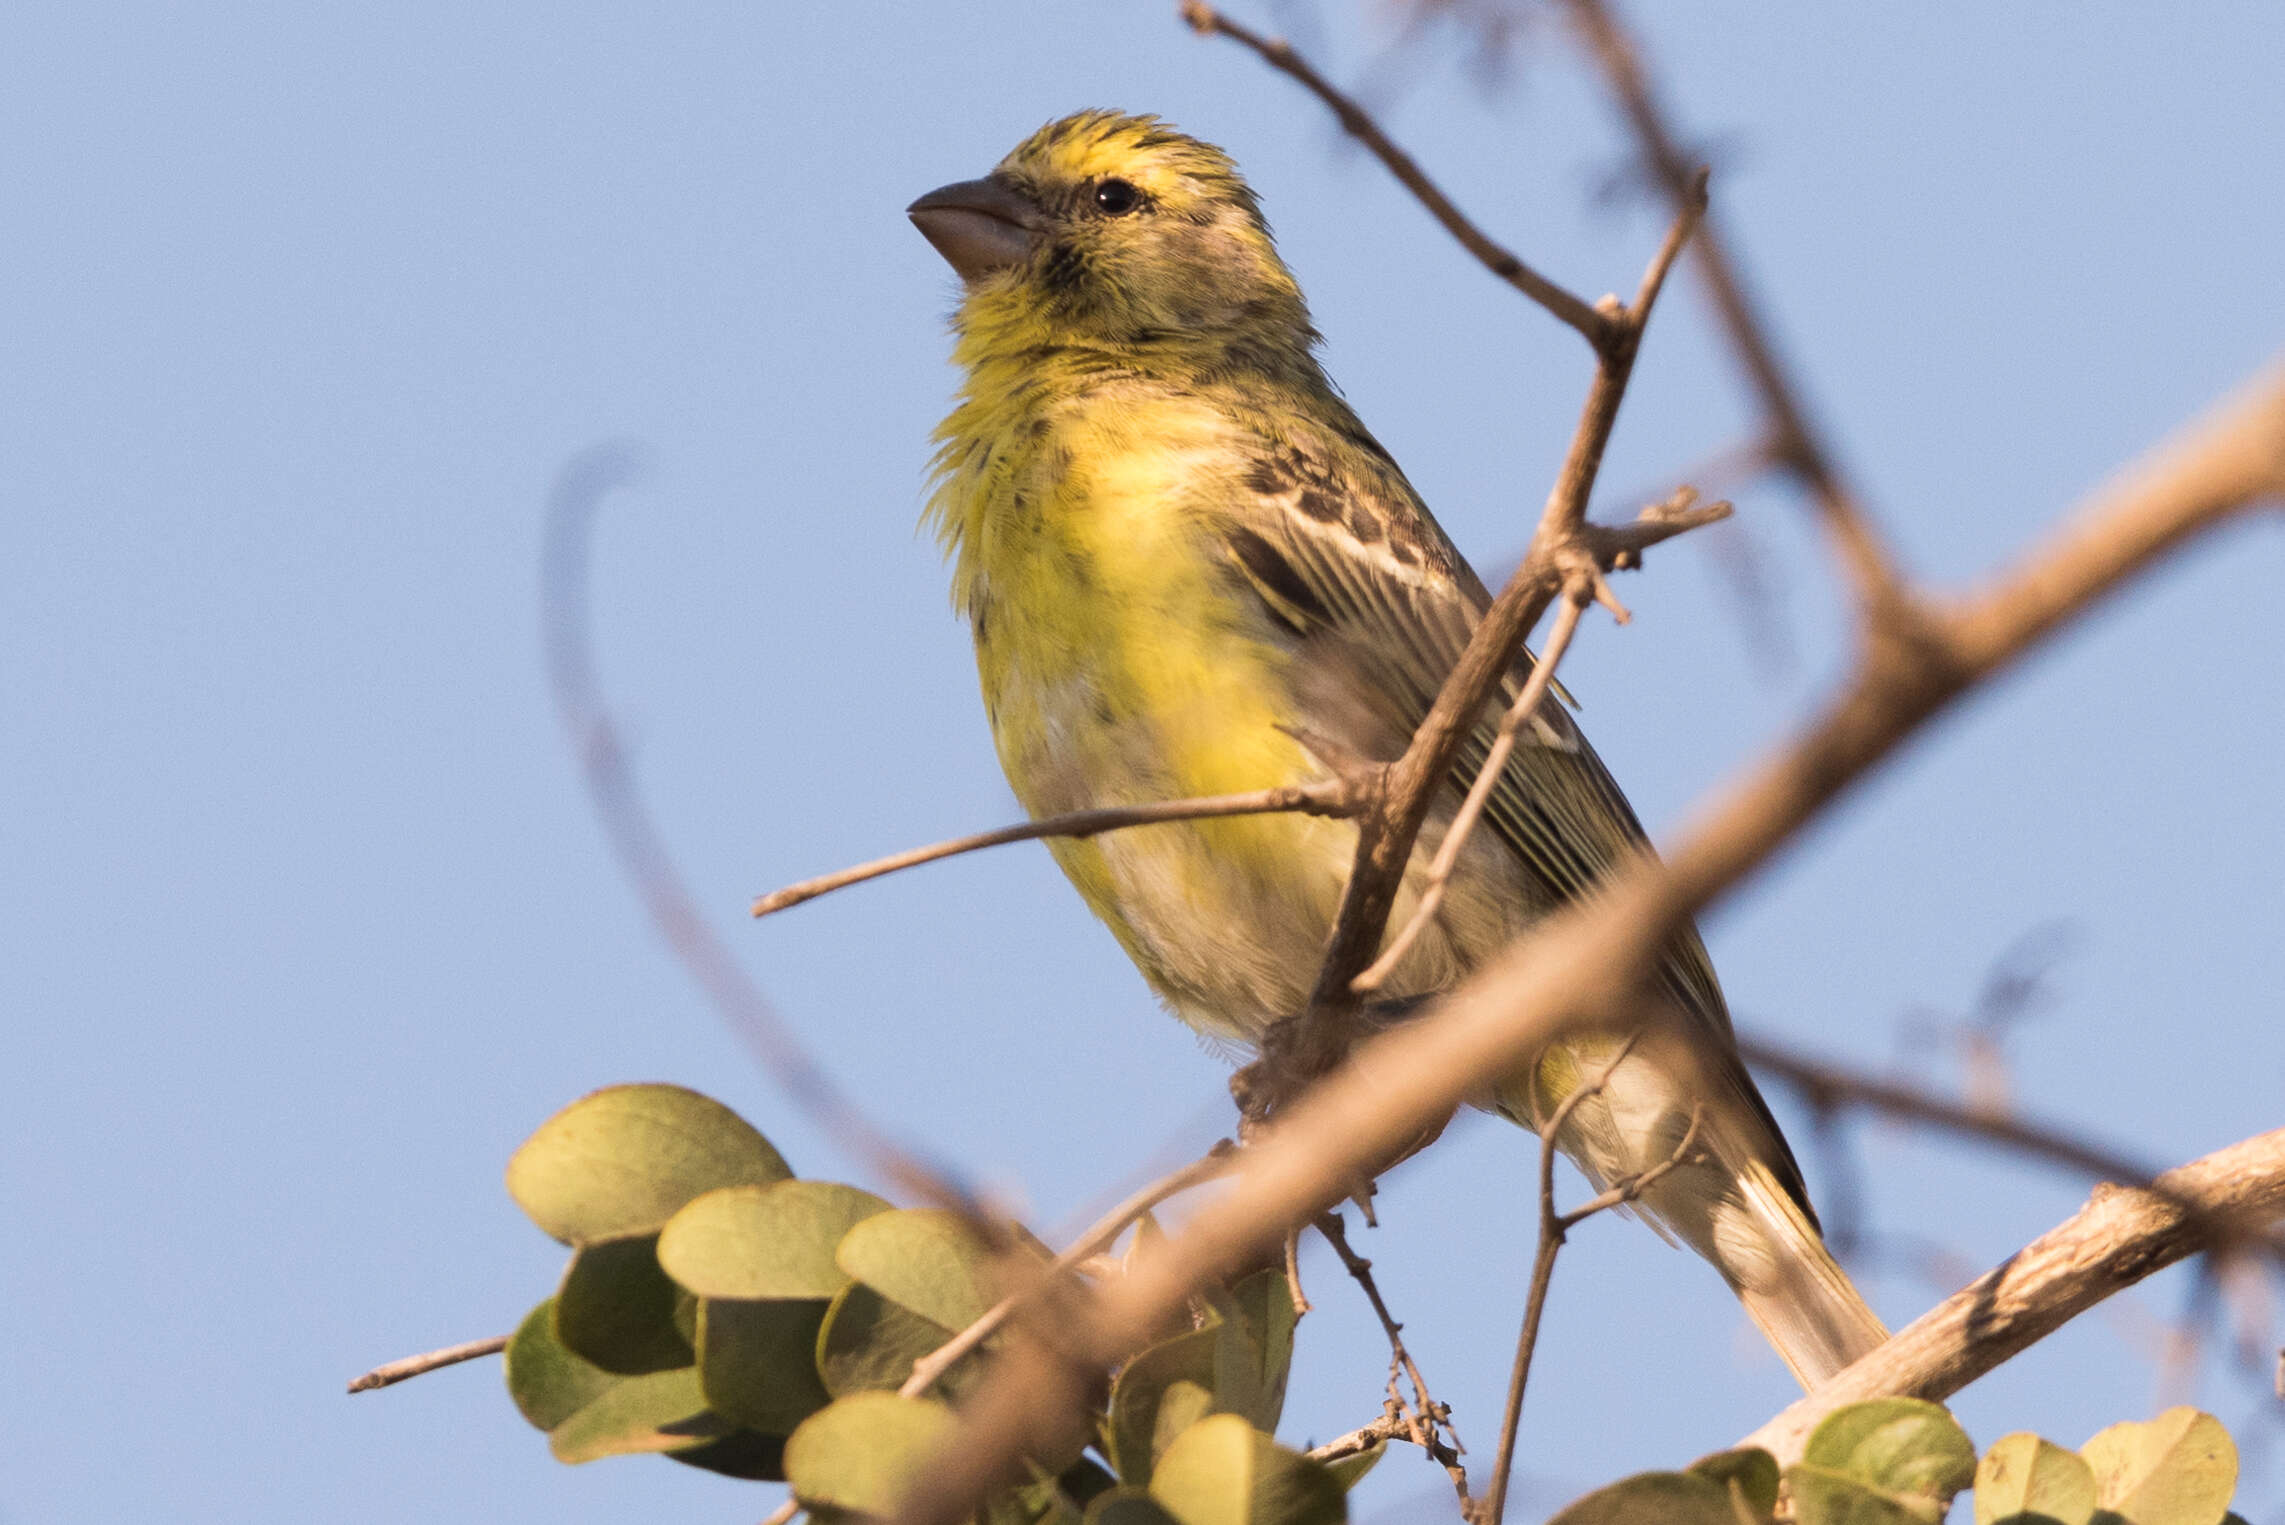 Image of White-bellied Canary